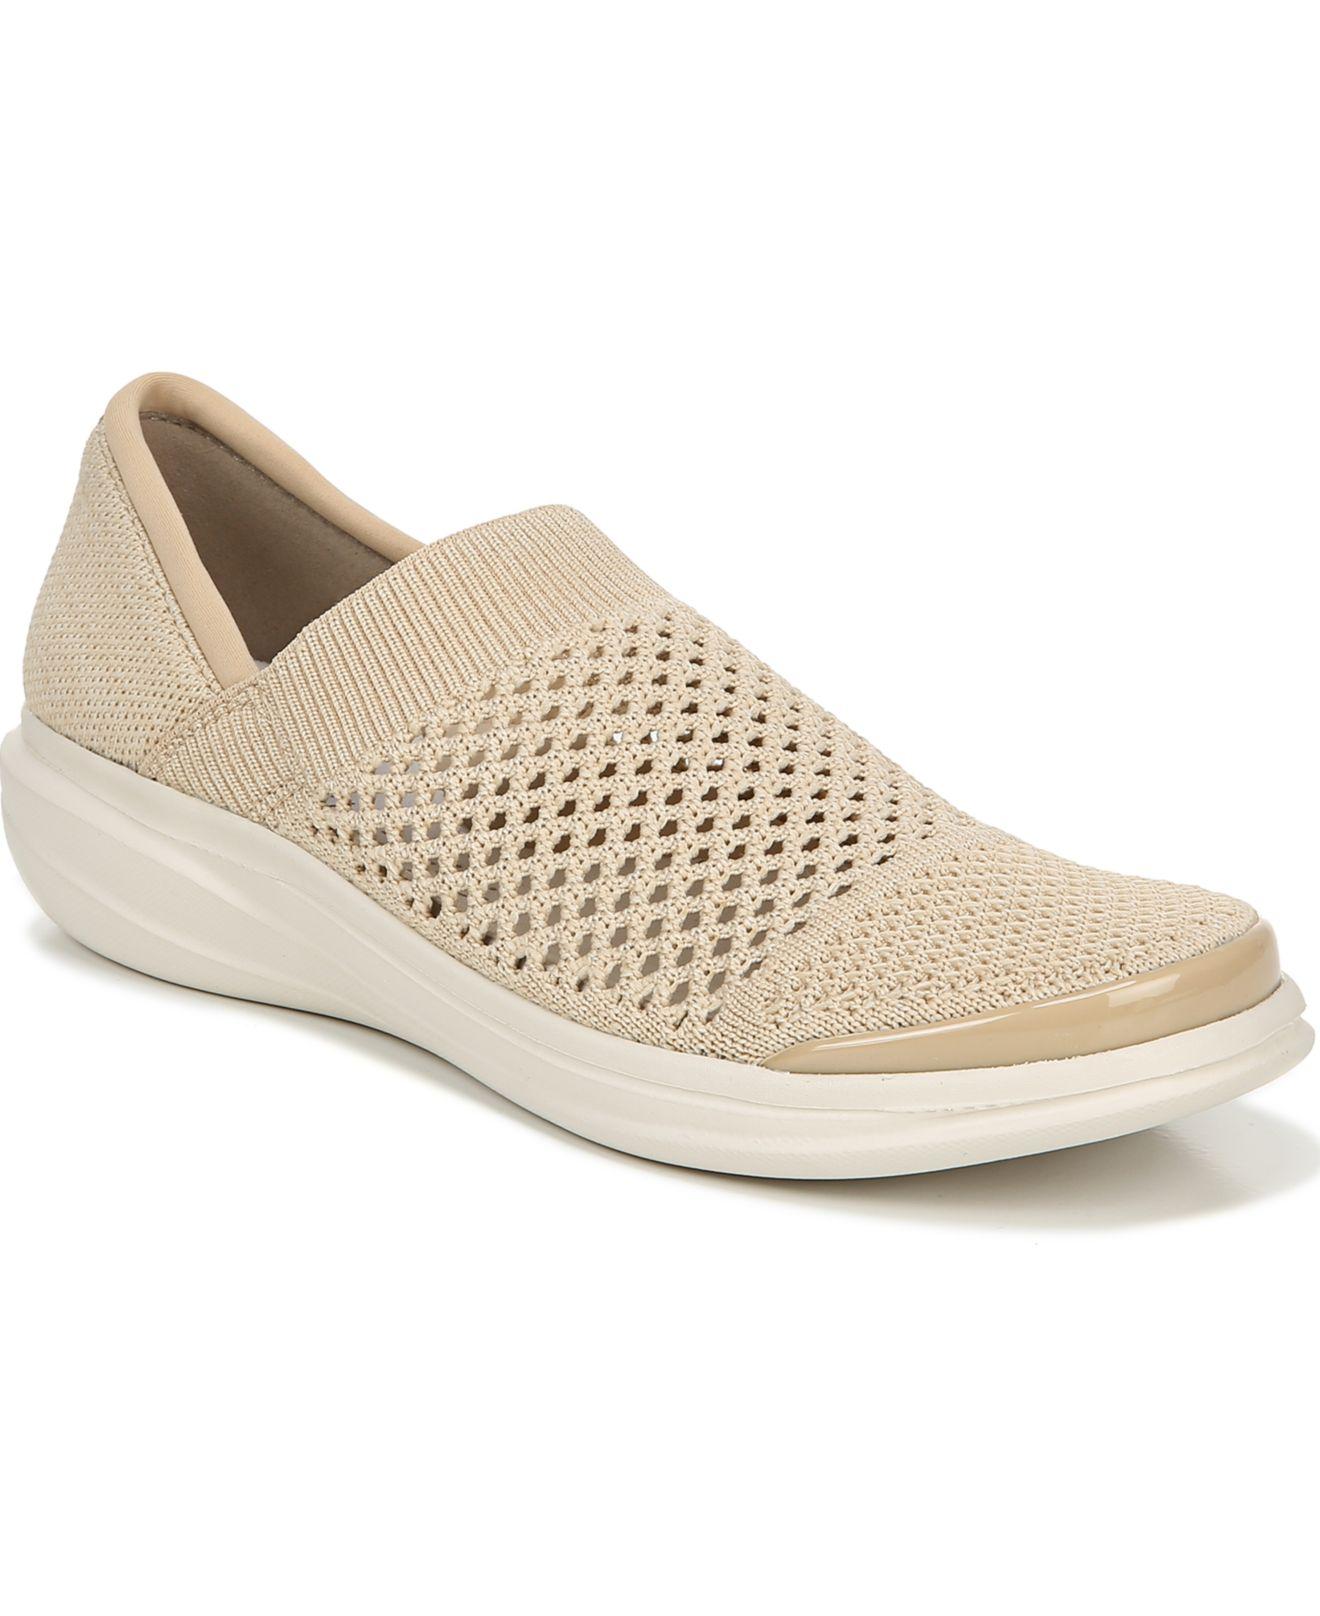 Bzees Rubber Charlie Slip-on Sneakers in Oatmeal (Natural) - Lyst